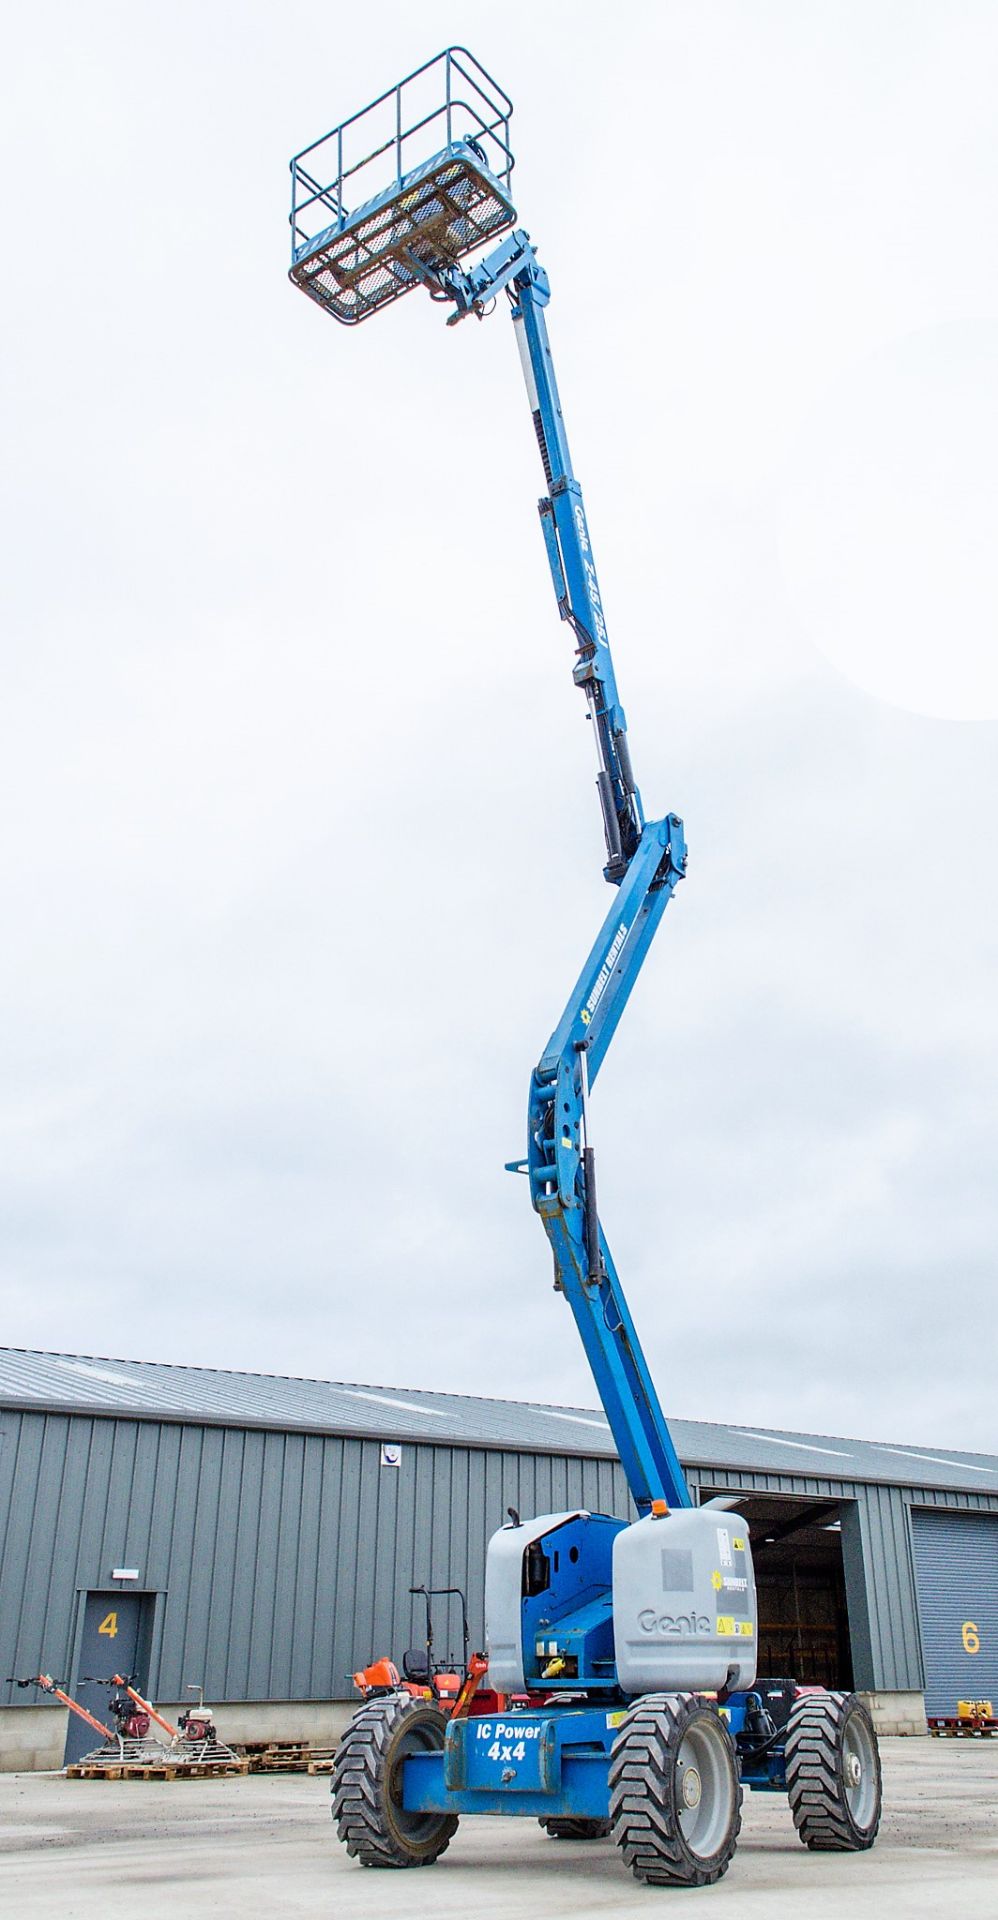 Genie Z-45/25 diesel driven articulated boom lift access platform Year: 2012 S/N: Z452512B-2012 - Image 9 of 16